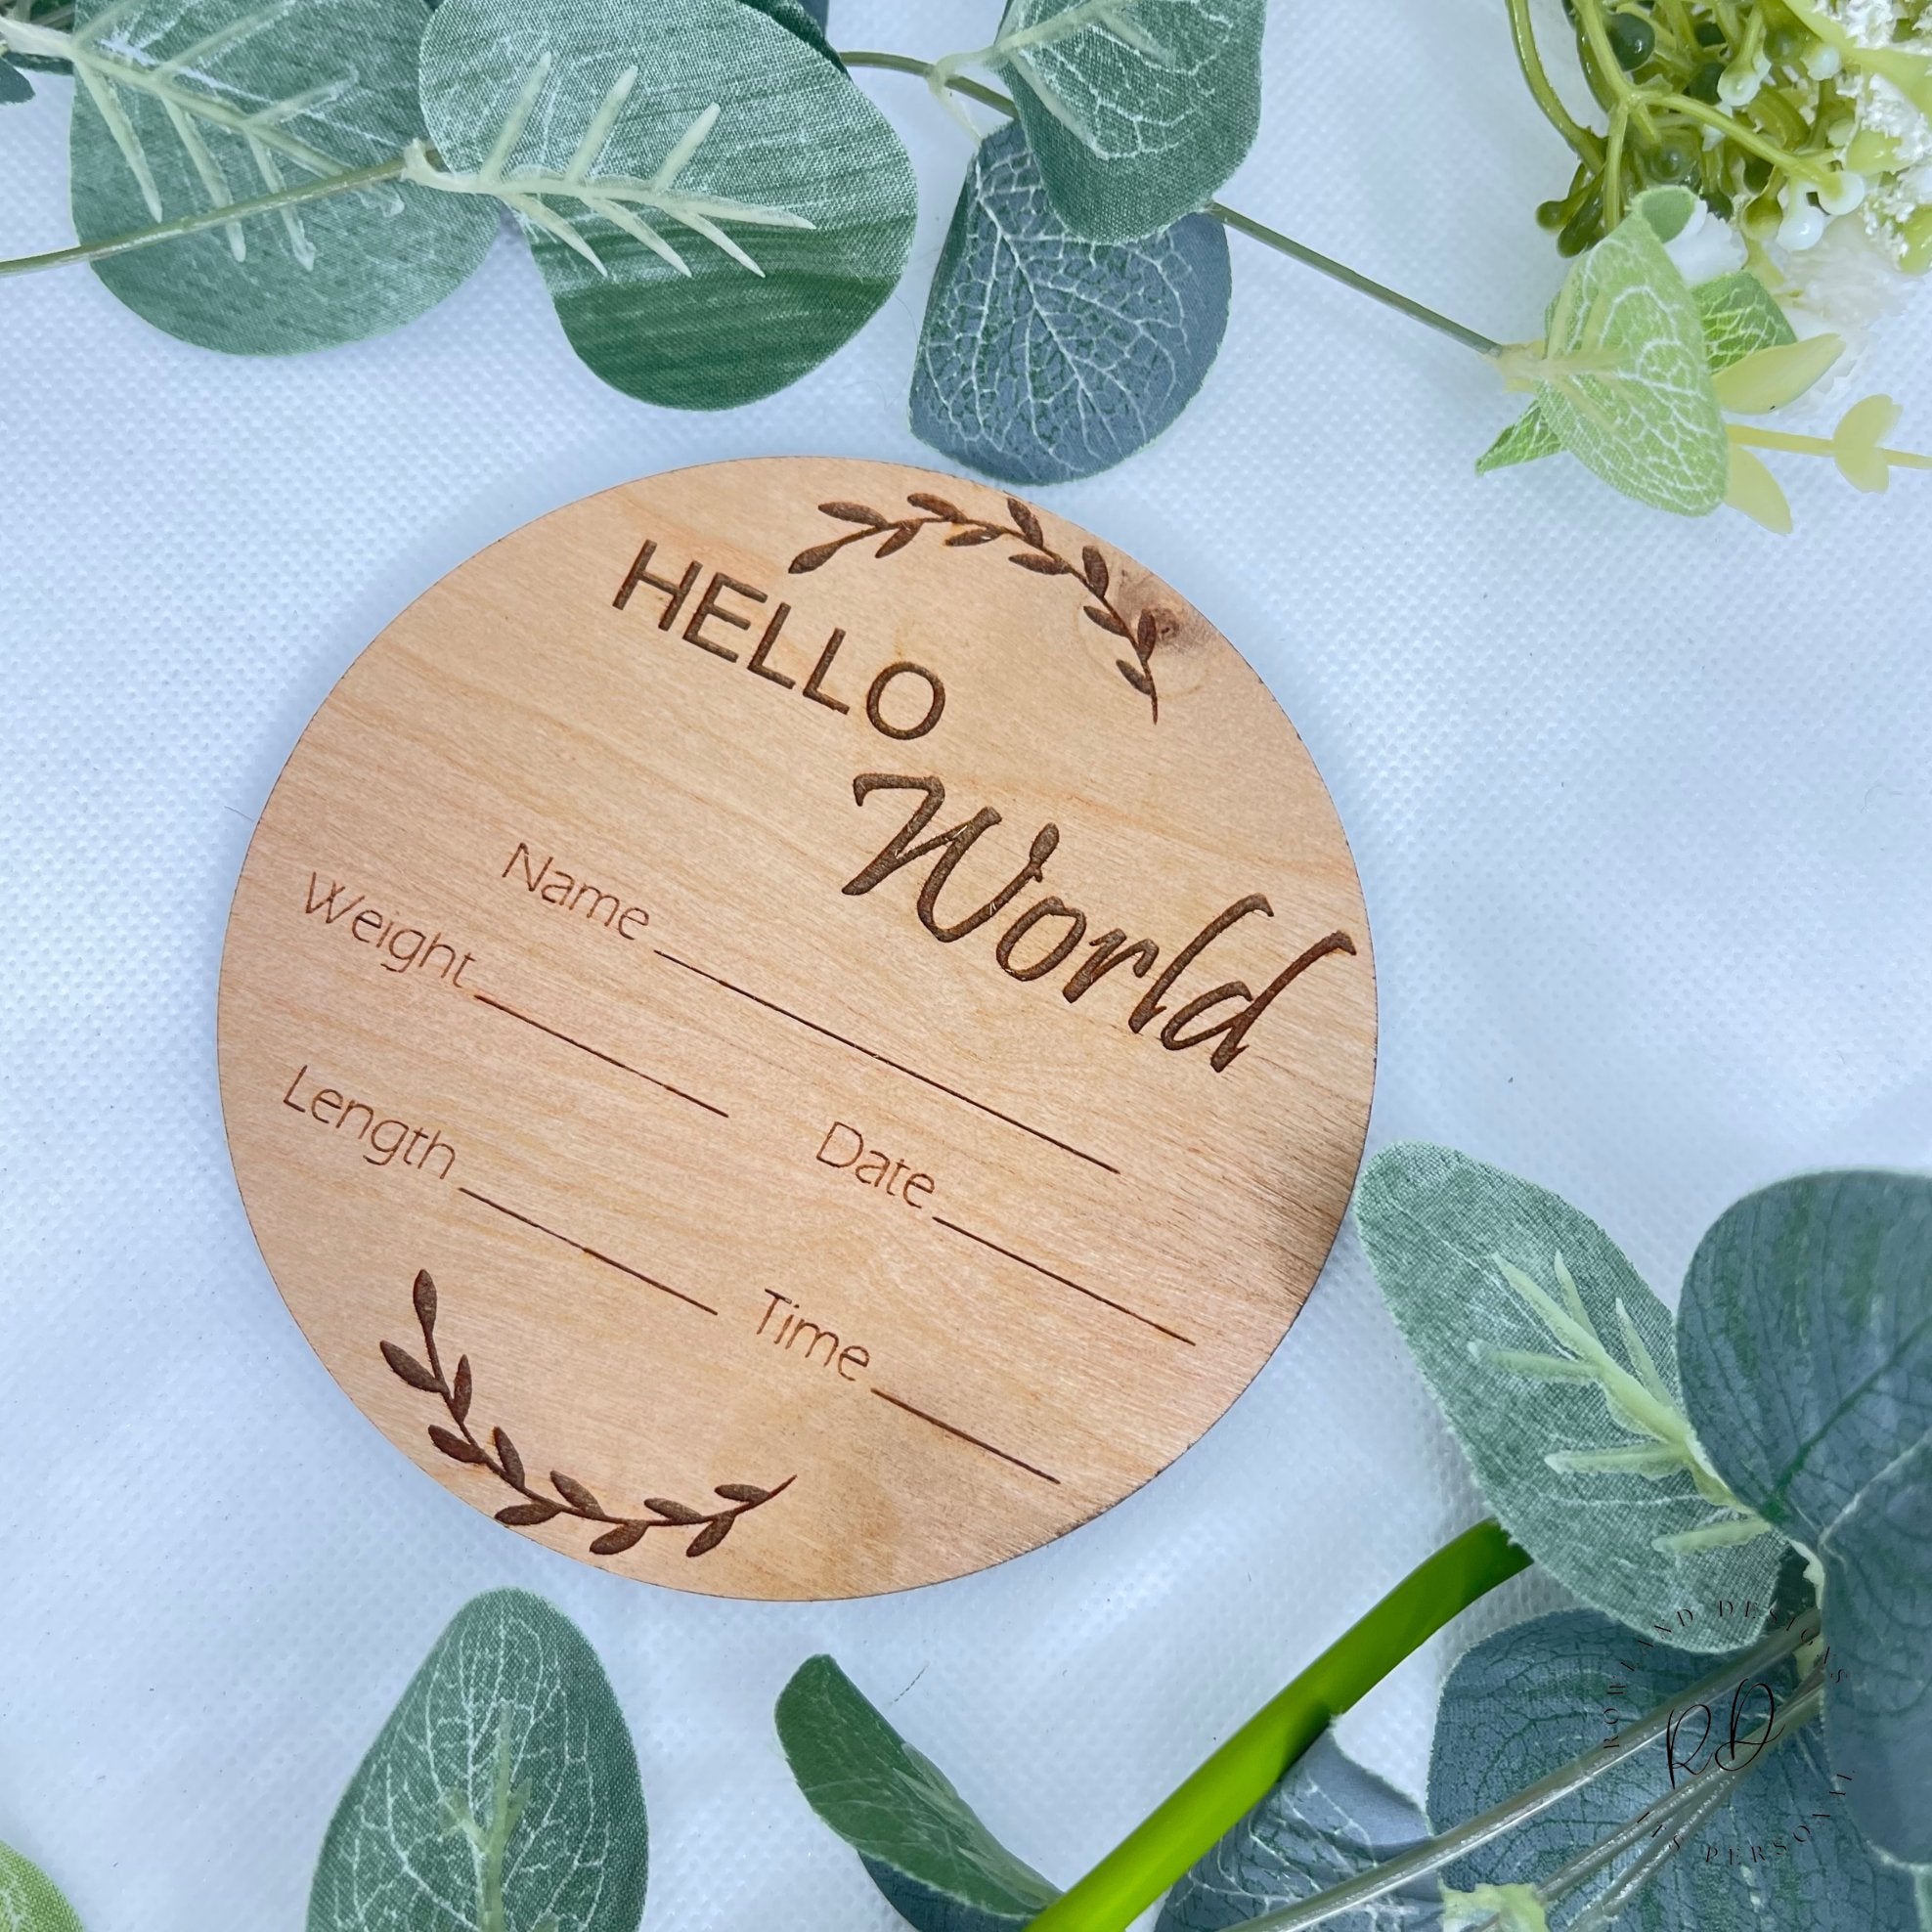 Hello World baby announcement plaque - a charming keepsake for celebrating your new arrival.